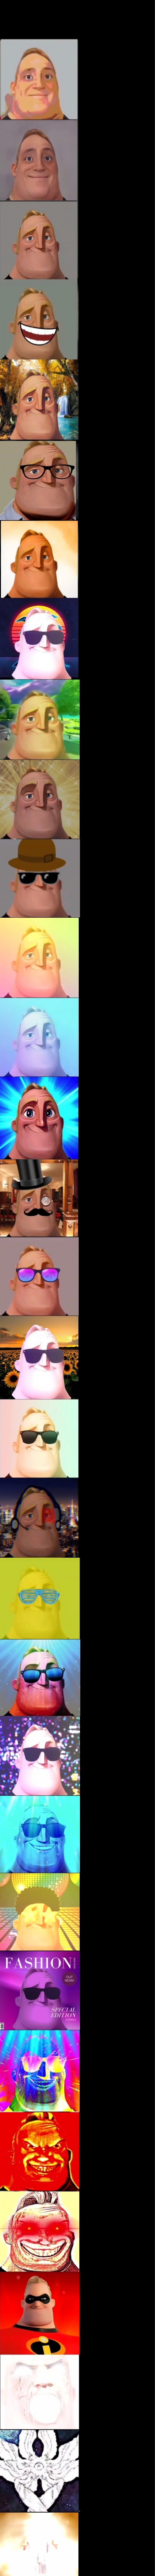 mr incredibel becoming canny all stars remastered Blank Meme Template